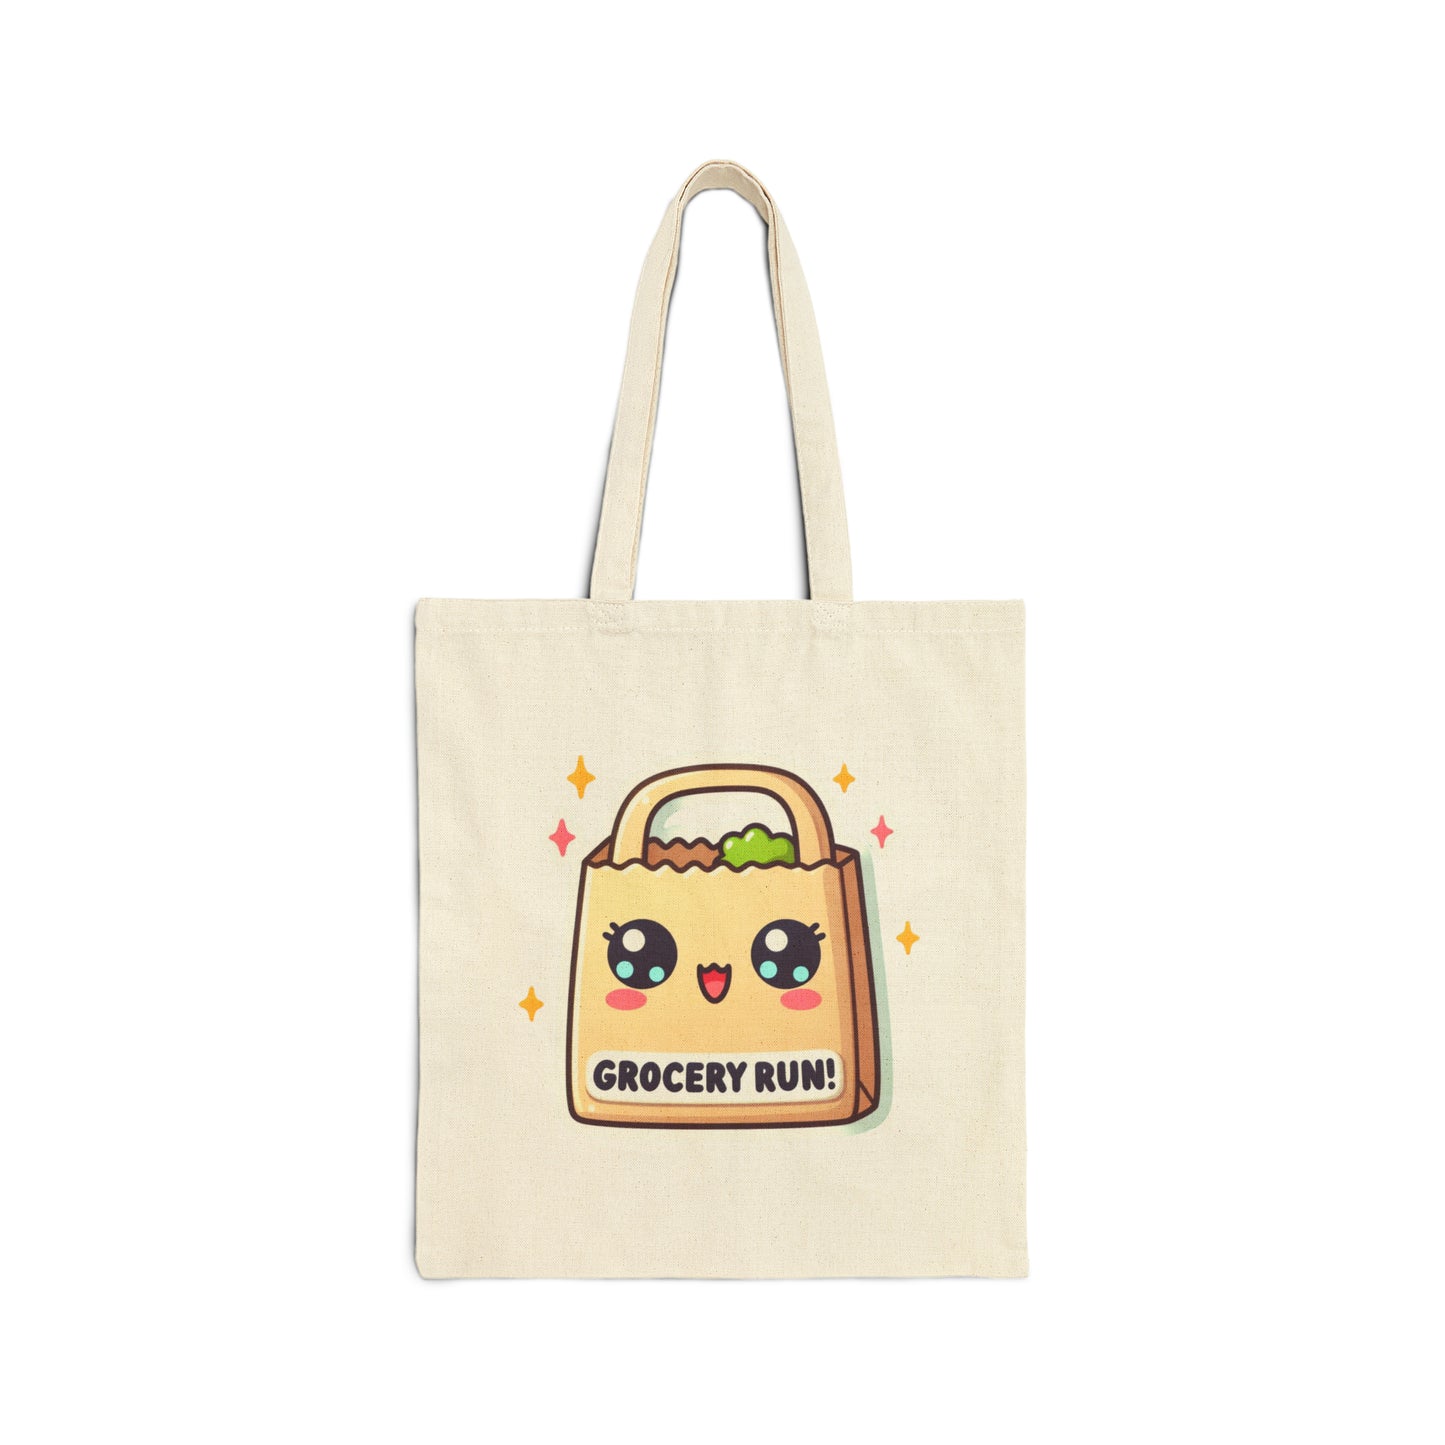 Grocery Run 2 Cotton Canvas Tote Bag